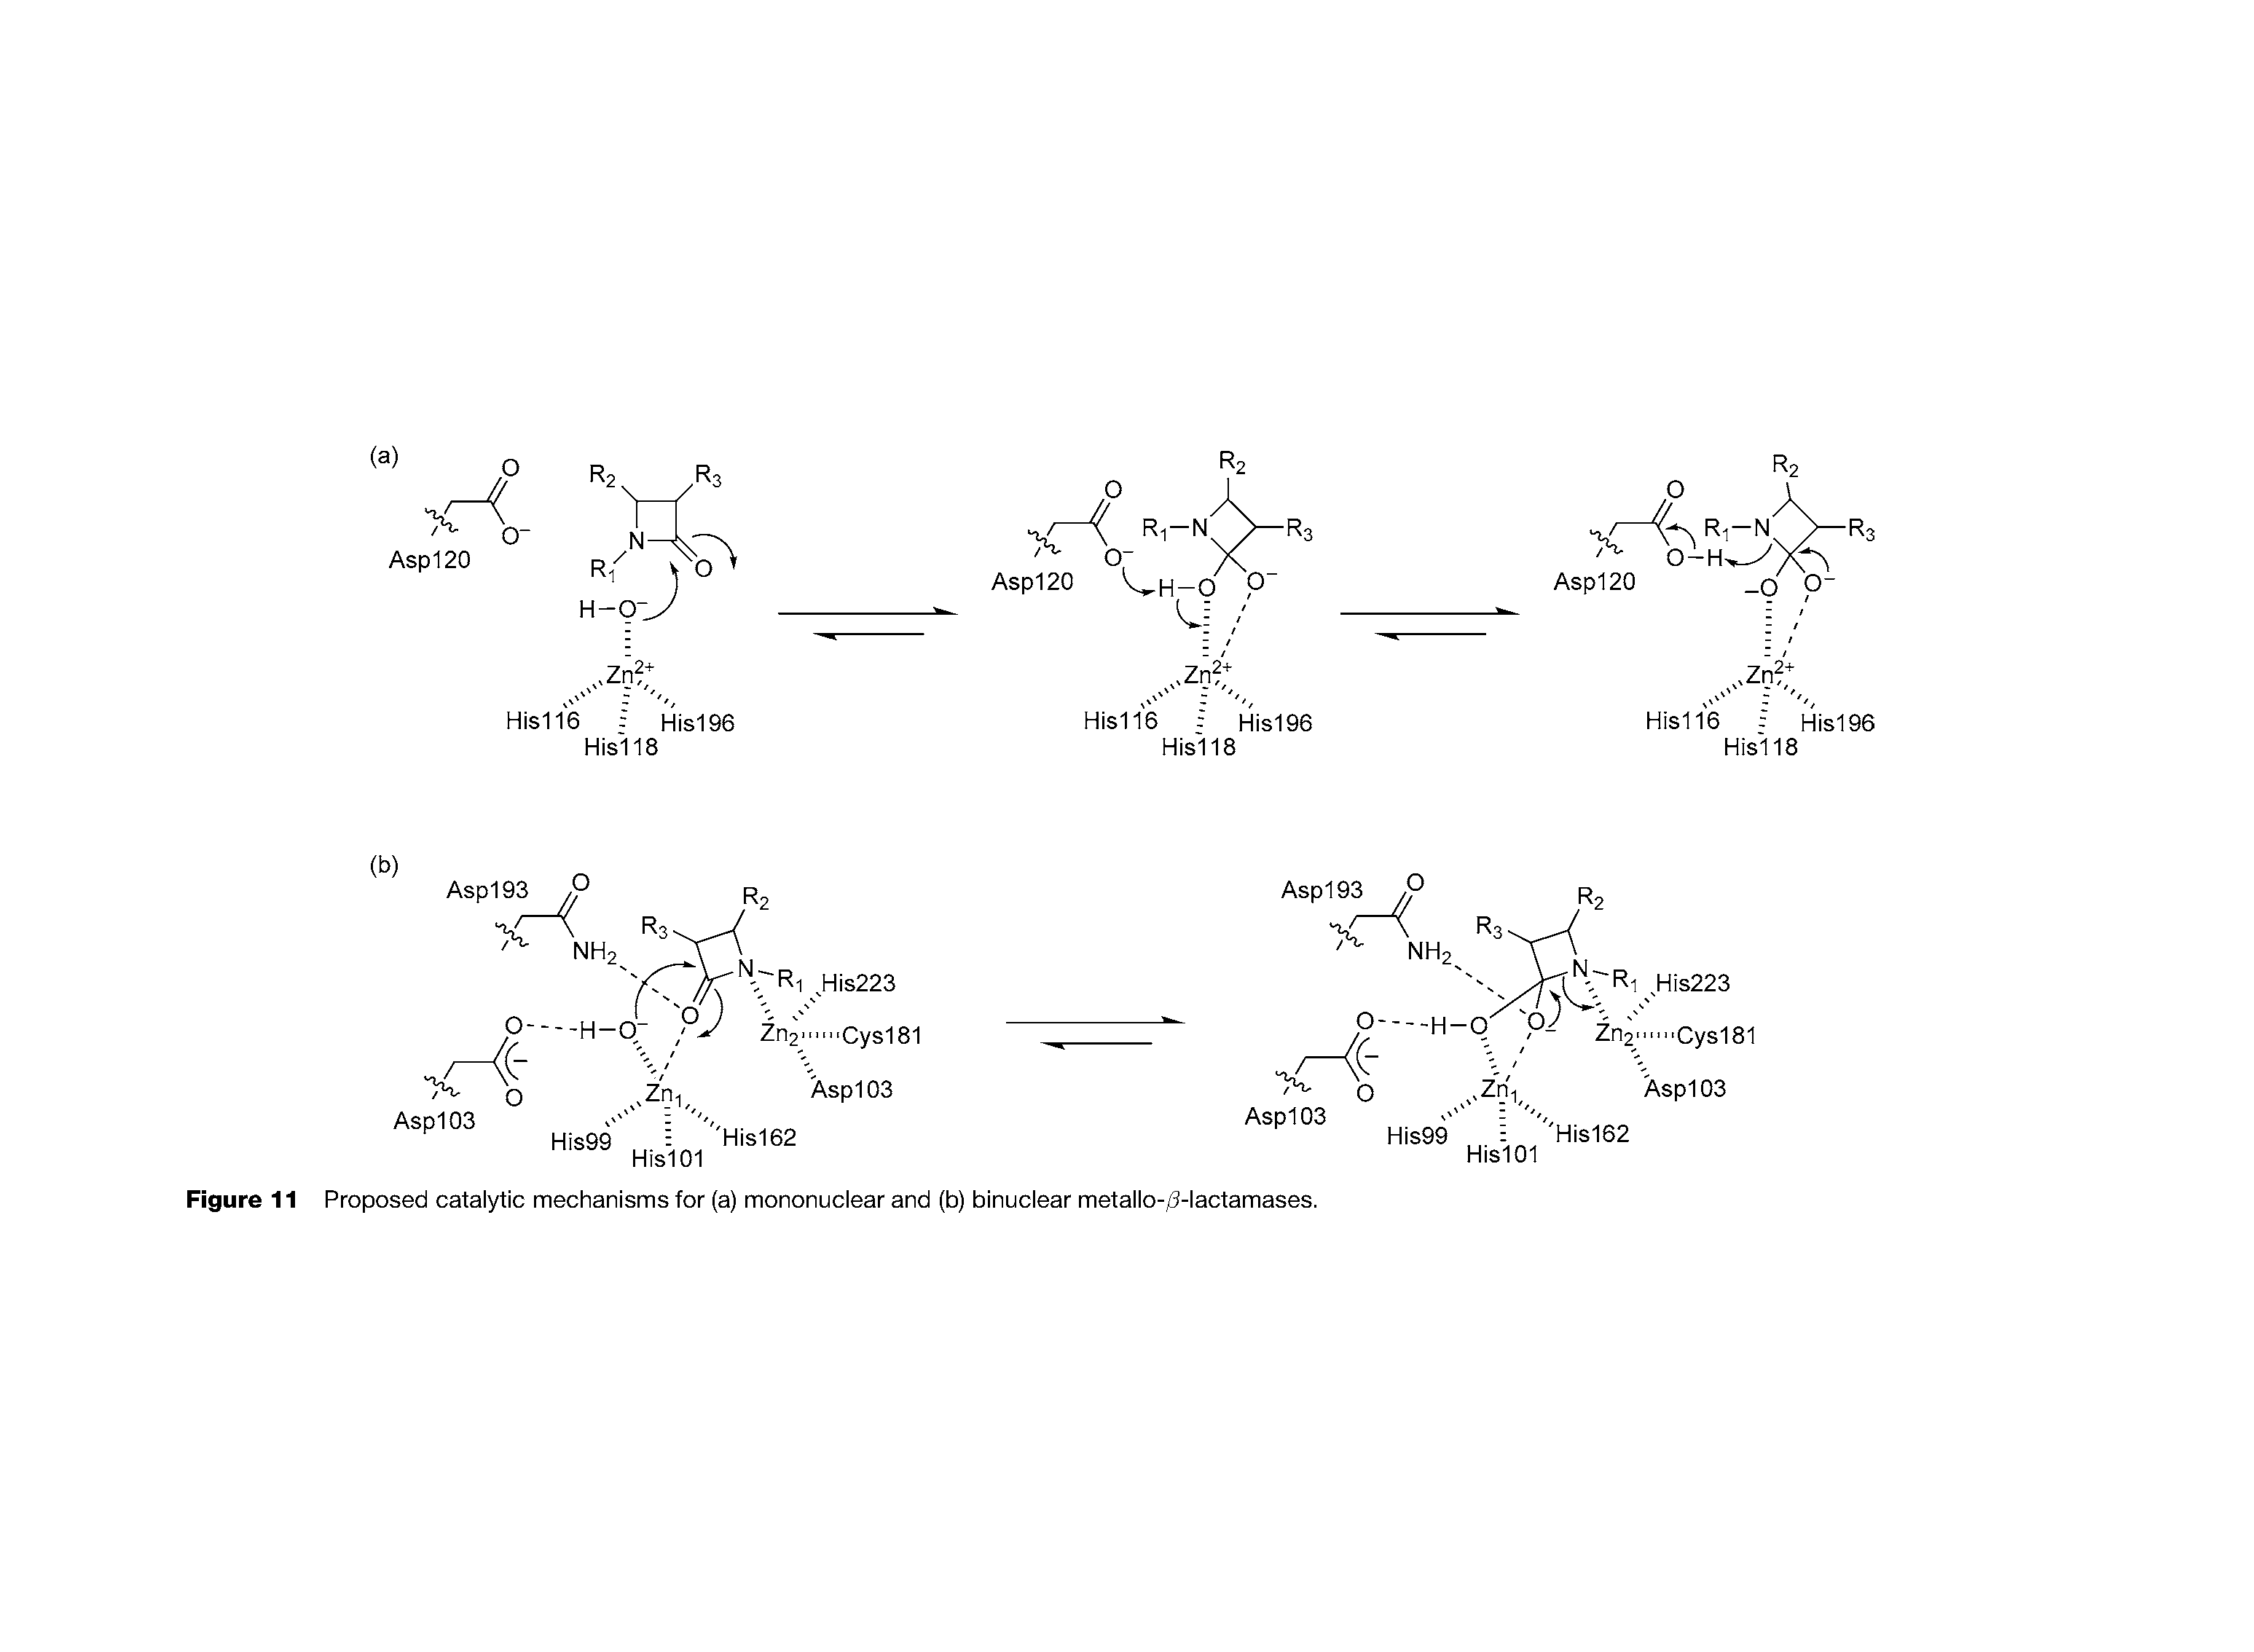 Figure 11 Proposed catalytic mechanisms for (a) mononuclear and (b) binuclear metallo-/3-lactamases.